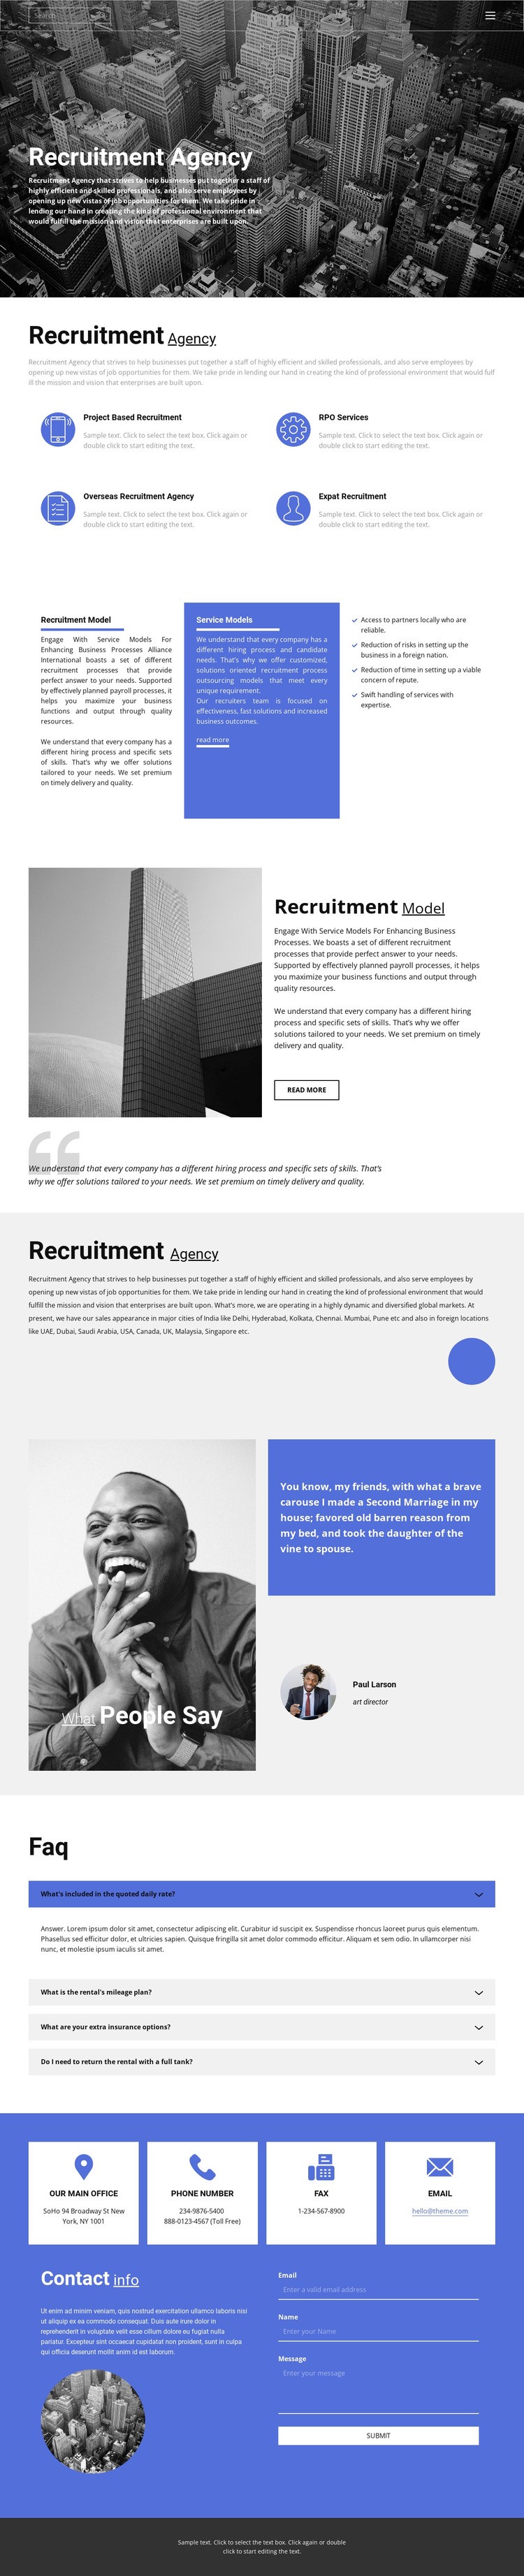 Recruiting agency with good experience Html Code Example